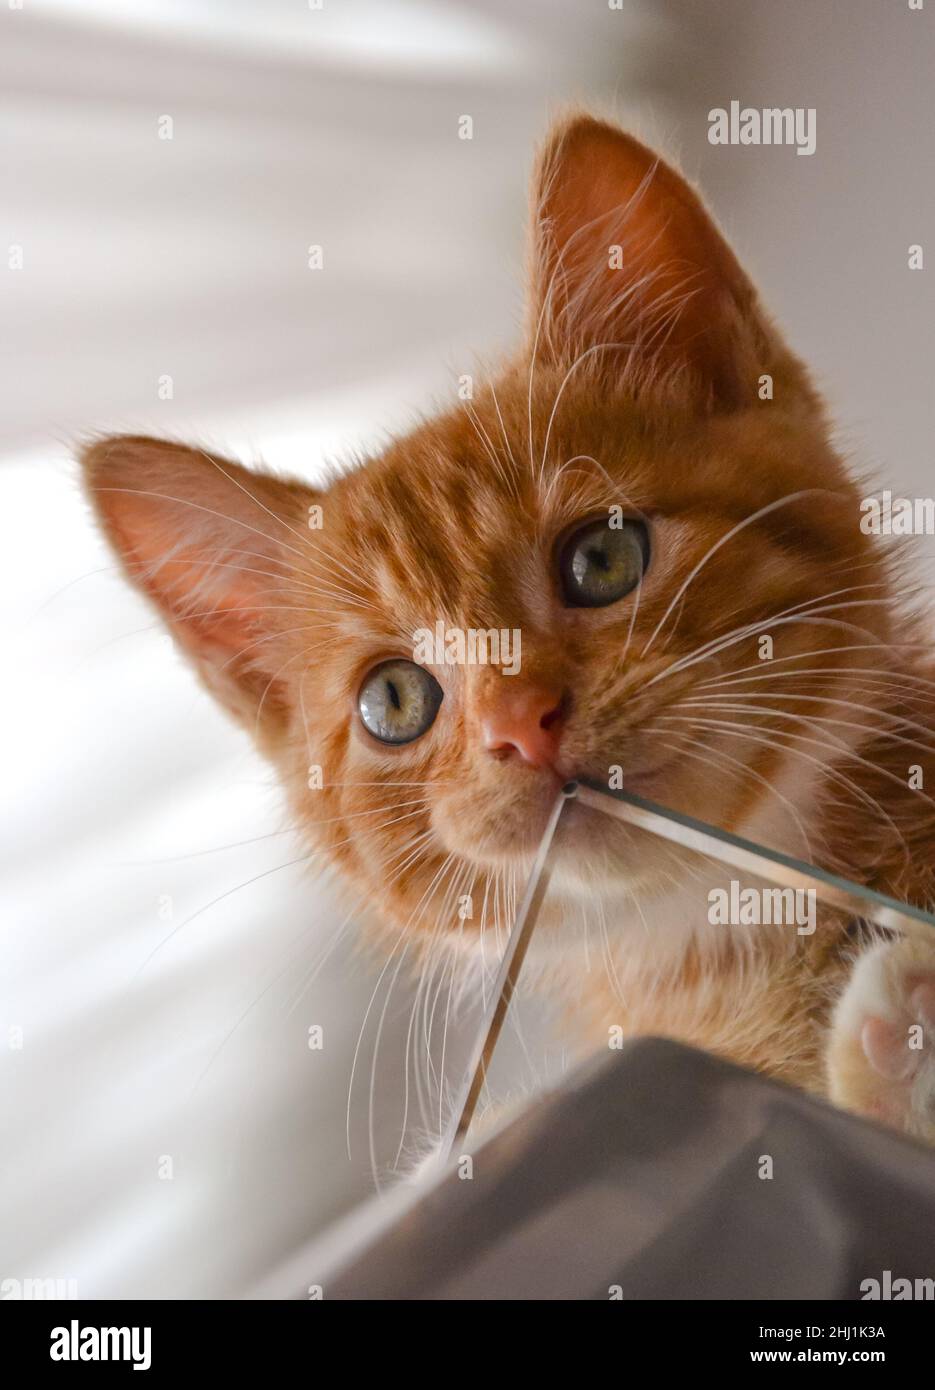 Playful ginger kitten on the edge of the table Stock Photo